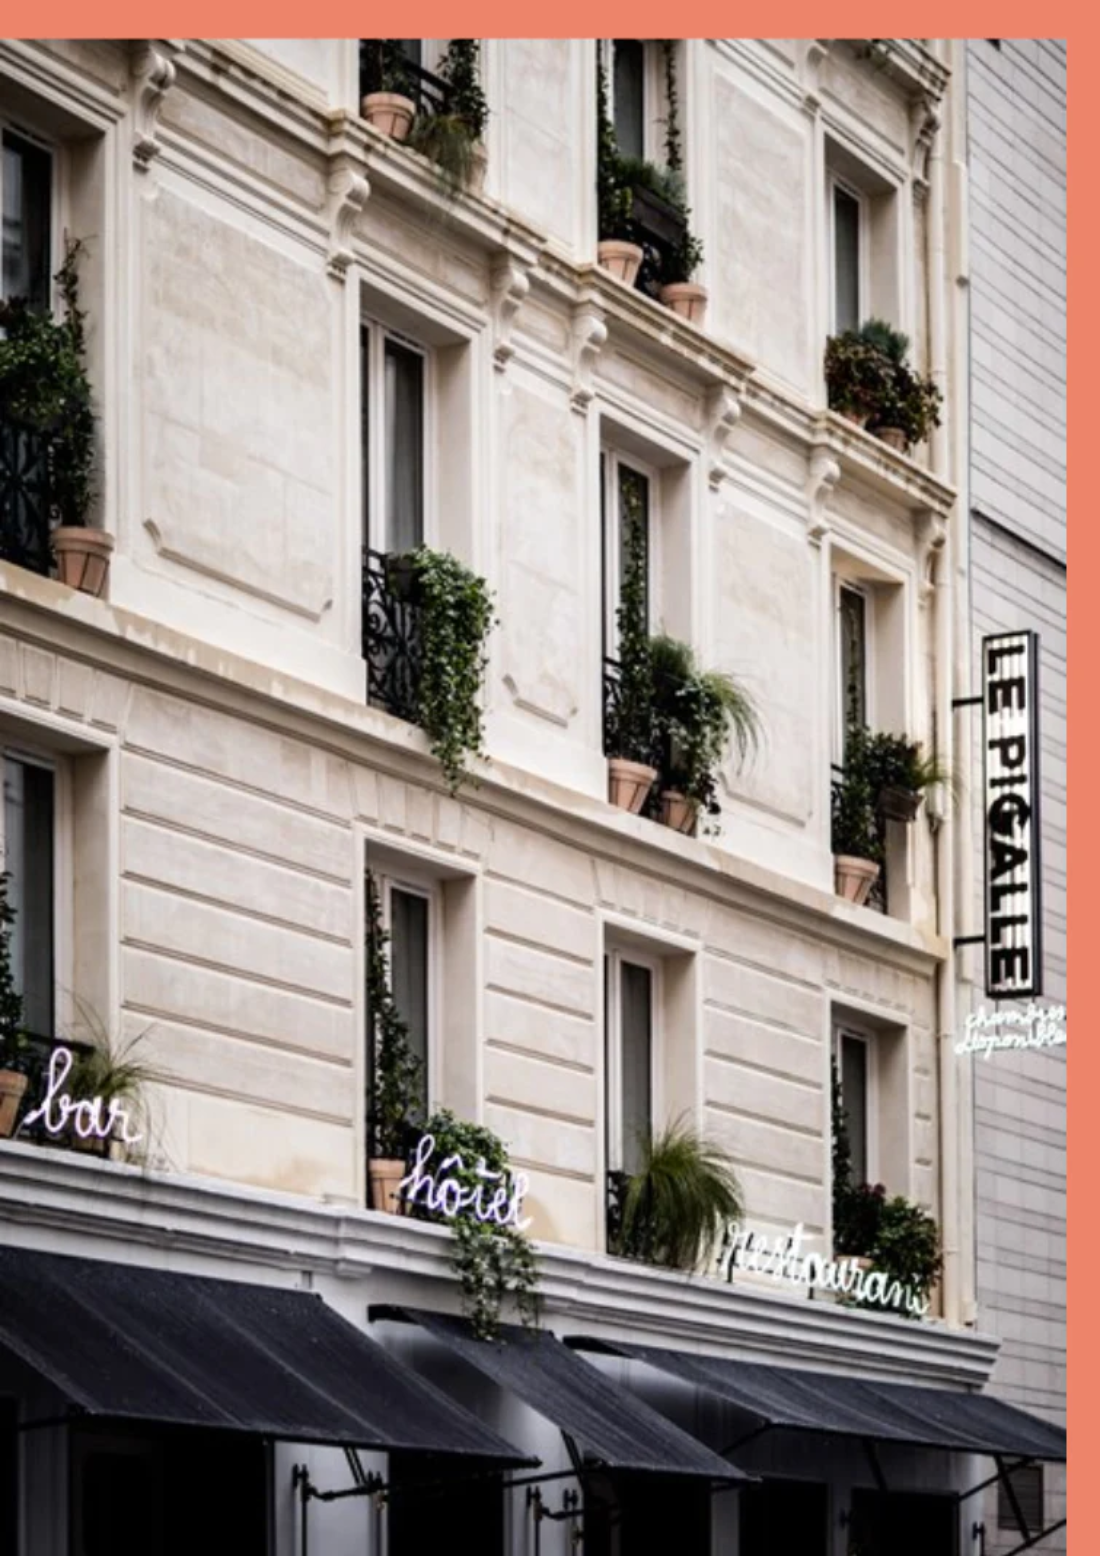 Make Yourself at Home: Le Pigalle, Paris